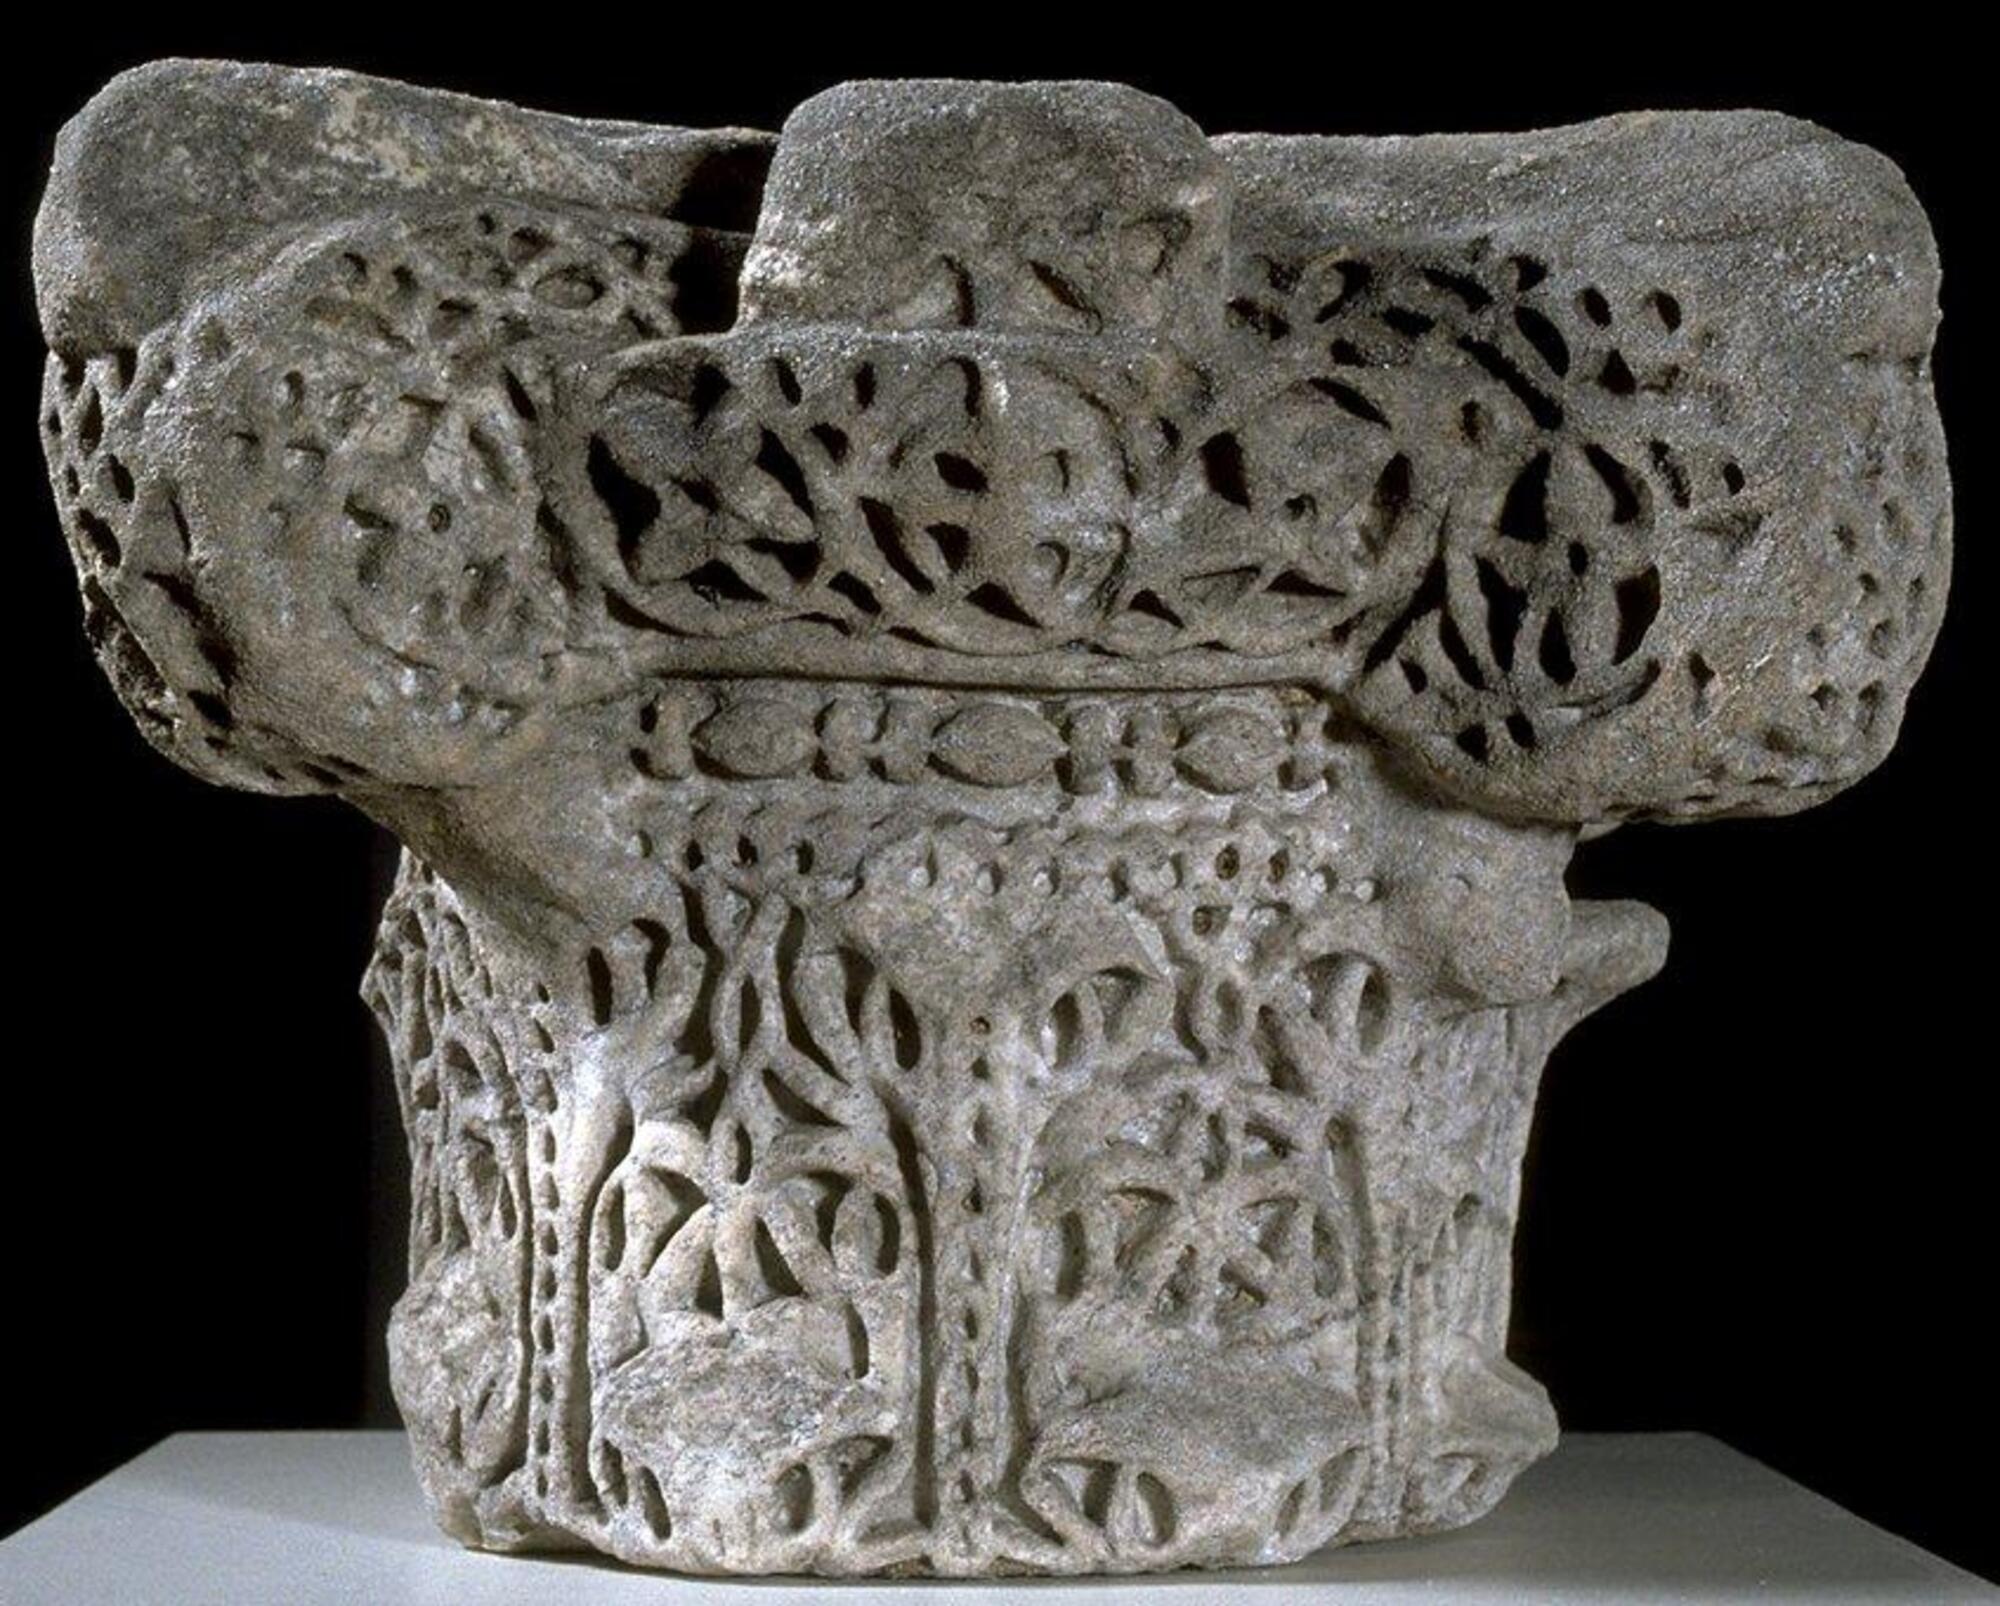 This capital, based upon the Roman composite order, features stylized acanthus leaves and rinceau on the bell of the capital, which terminates in a band of bead-and-reel motif on the astragal. This, in turn, is capped by an echinus decorated with three fleurons and vine rinceau on each face as well as four projecting volutes also decorated with rinceau and fleurons. Originally the bell of the capital had two tiers of acanthus leaves, but the capital has been cropped below the top of the first tier and the tips of the leaves, which once curved outward from the surface of the capital, have been sheared off.